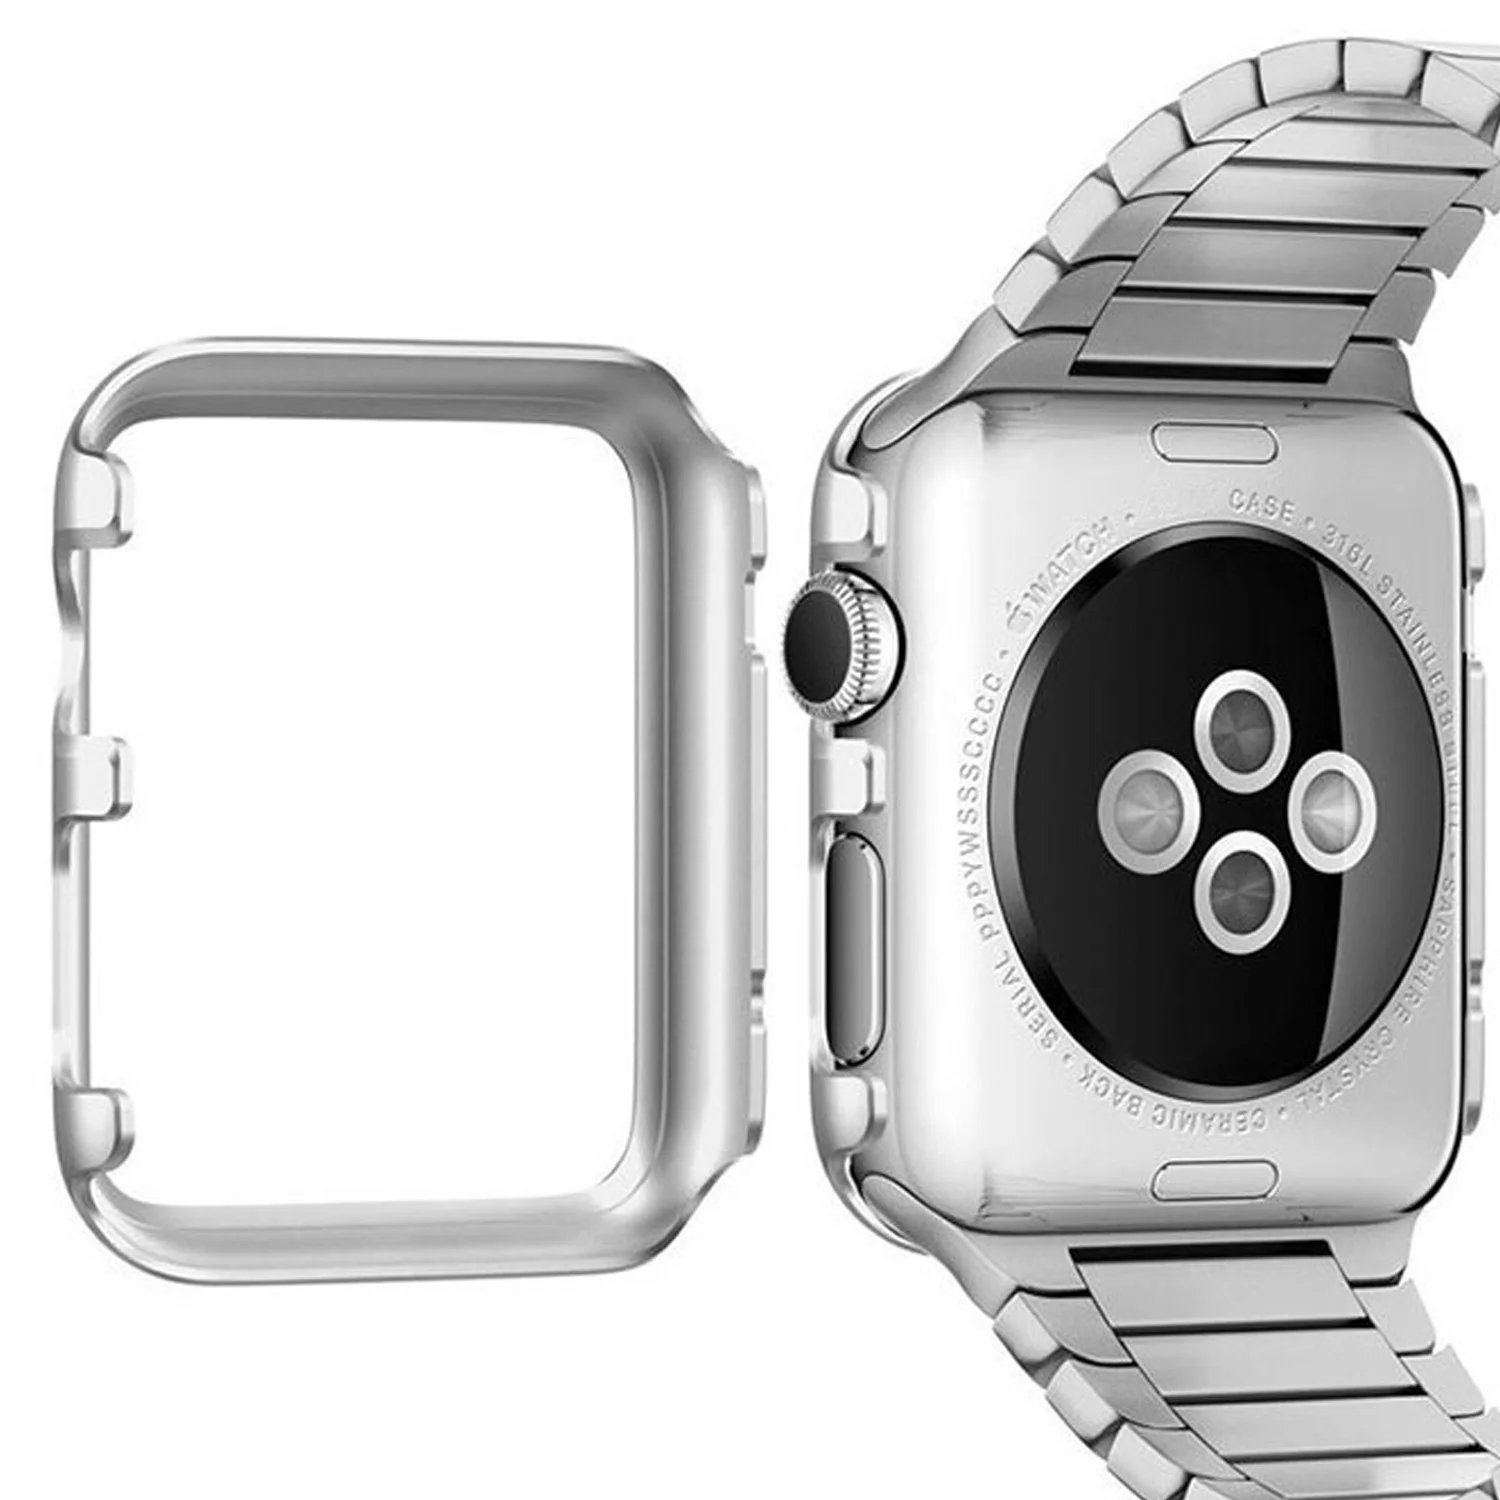 Besegad Aluminum Alloy Protector Protective Frame Case Cover Shell for Apple Watch iWatch Series 2 3 38mm 42mm Accessories